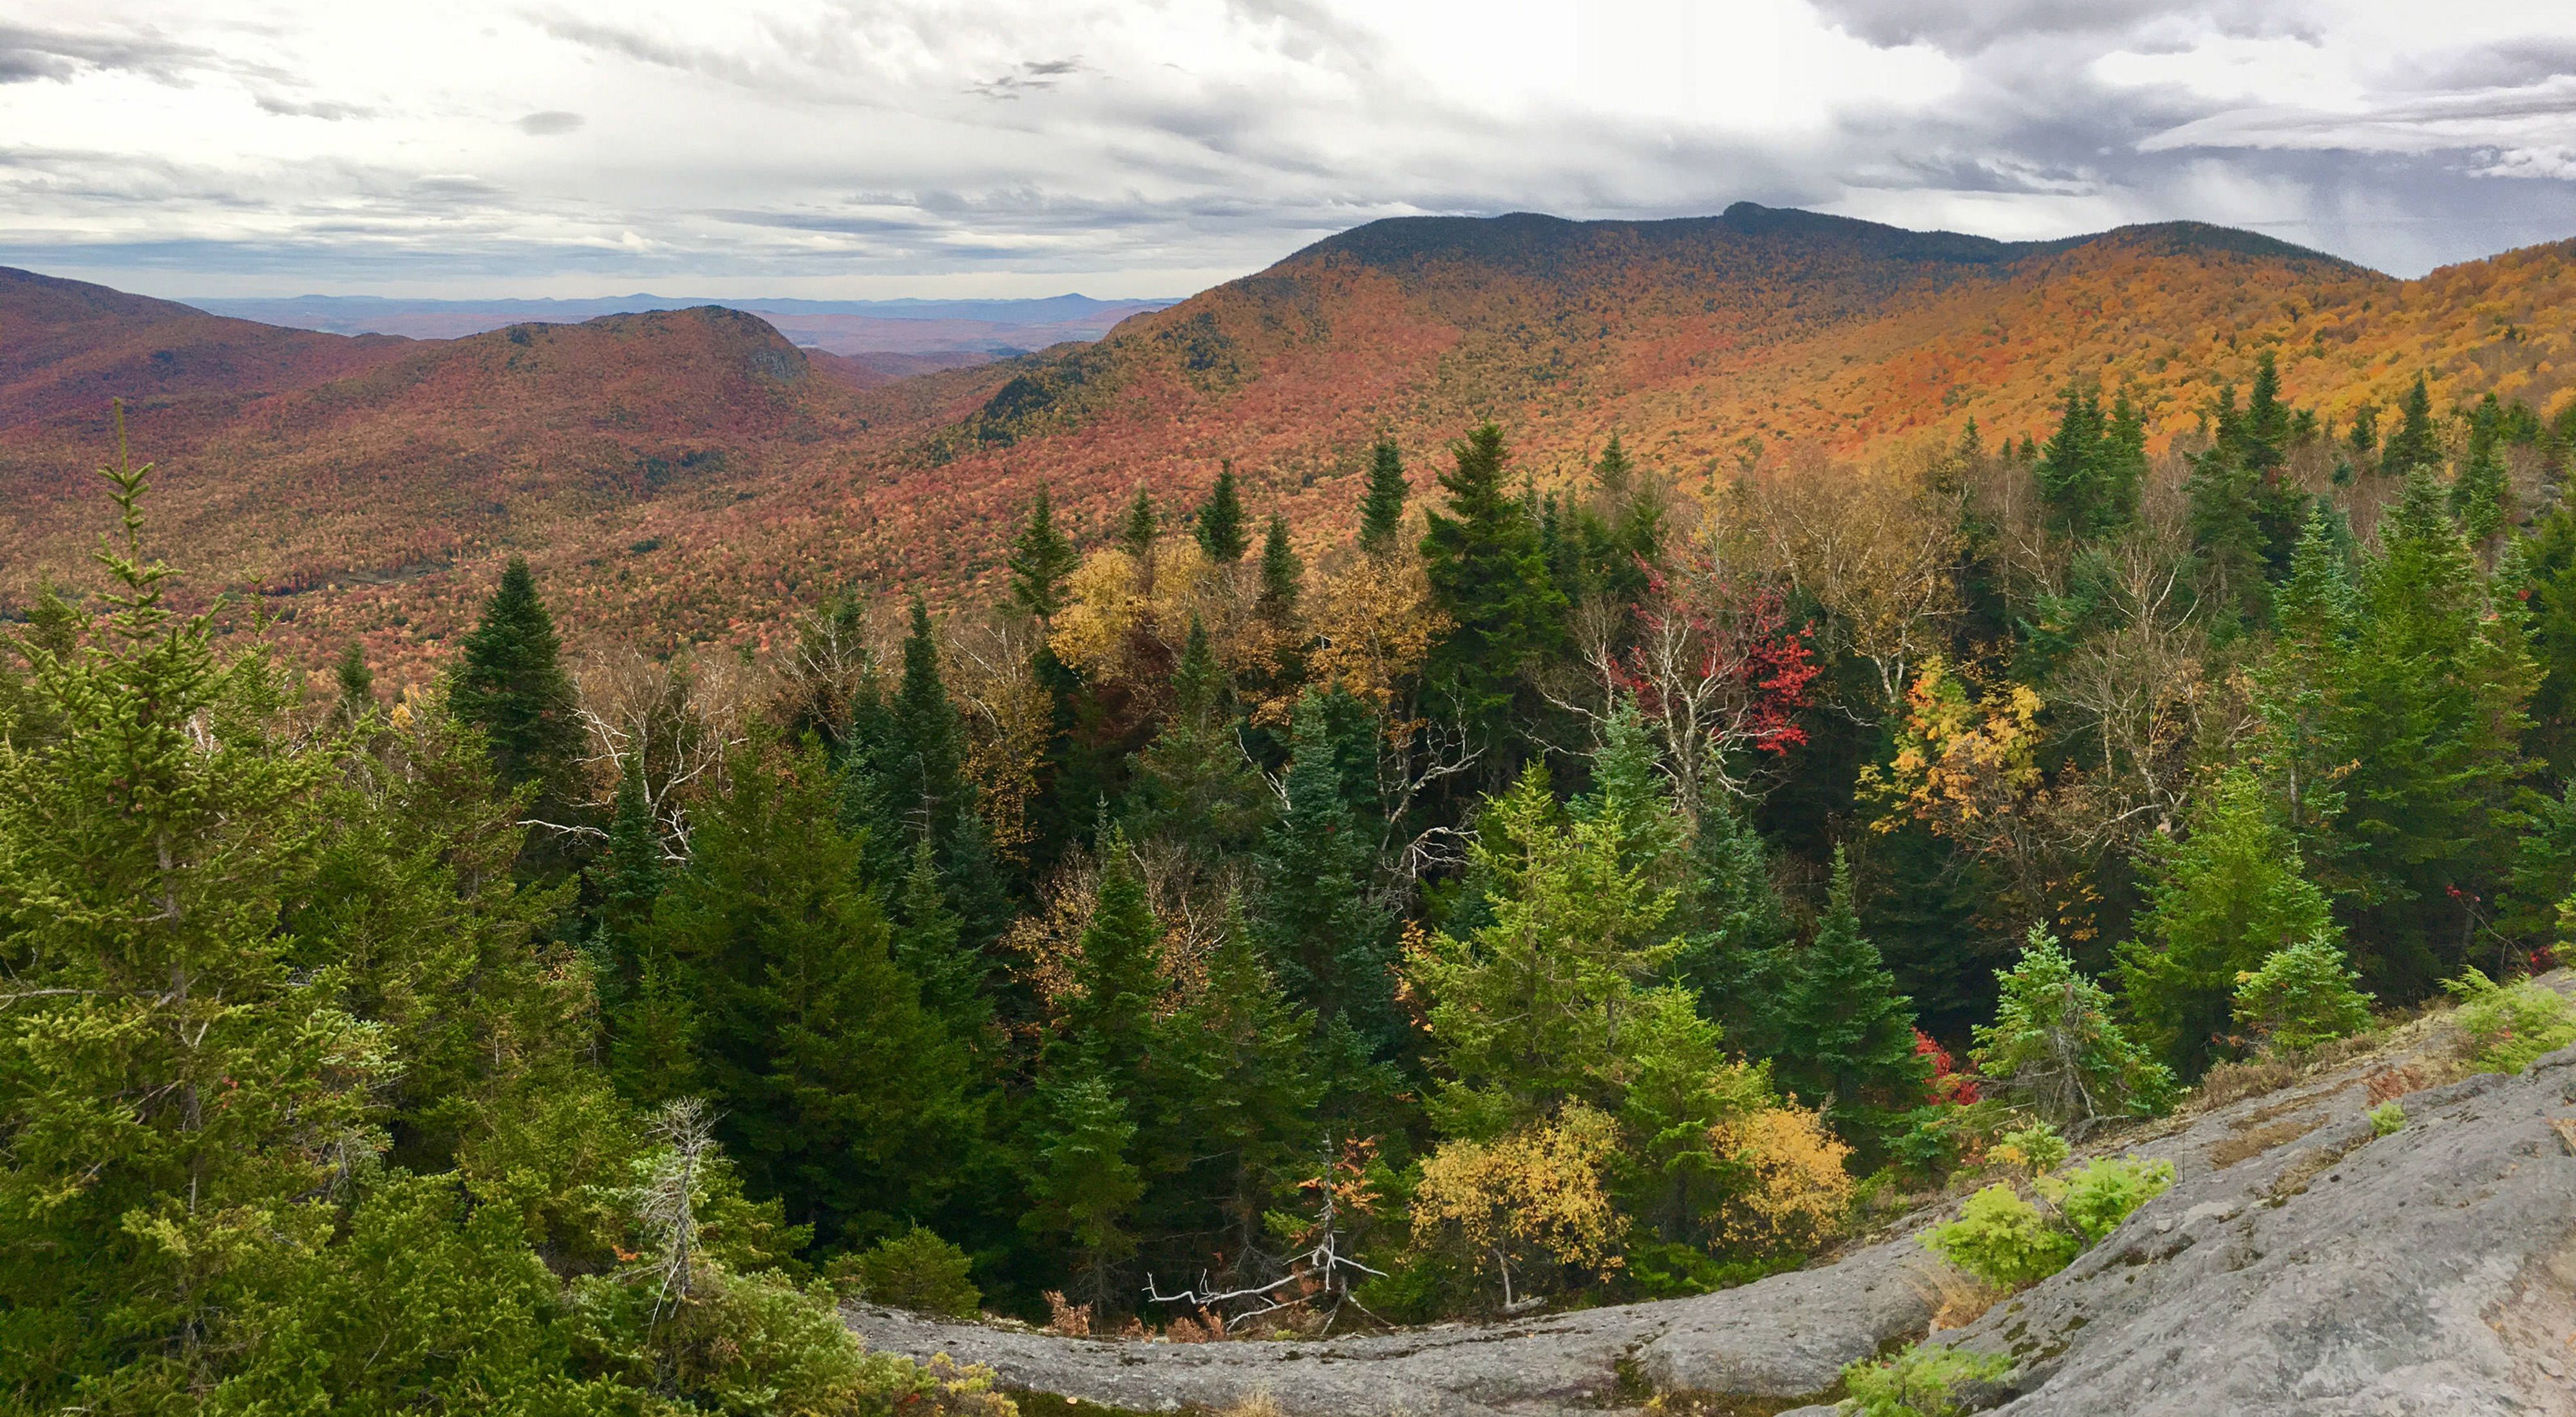 View of forests in fall foliage from Burnt Mountain, Vermont.